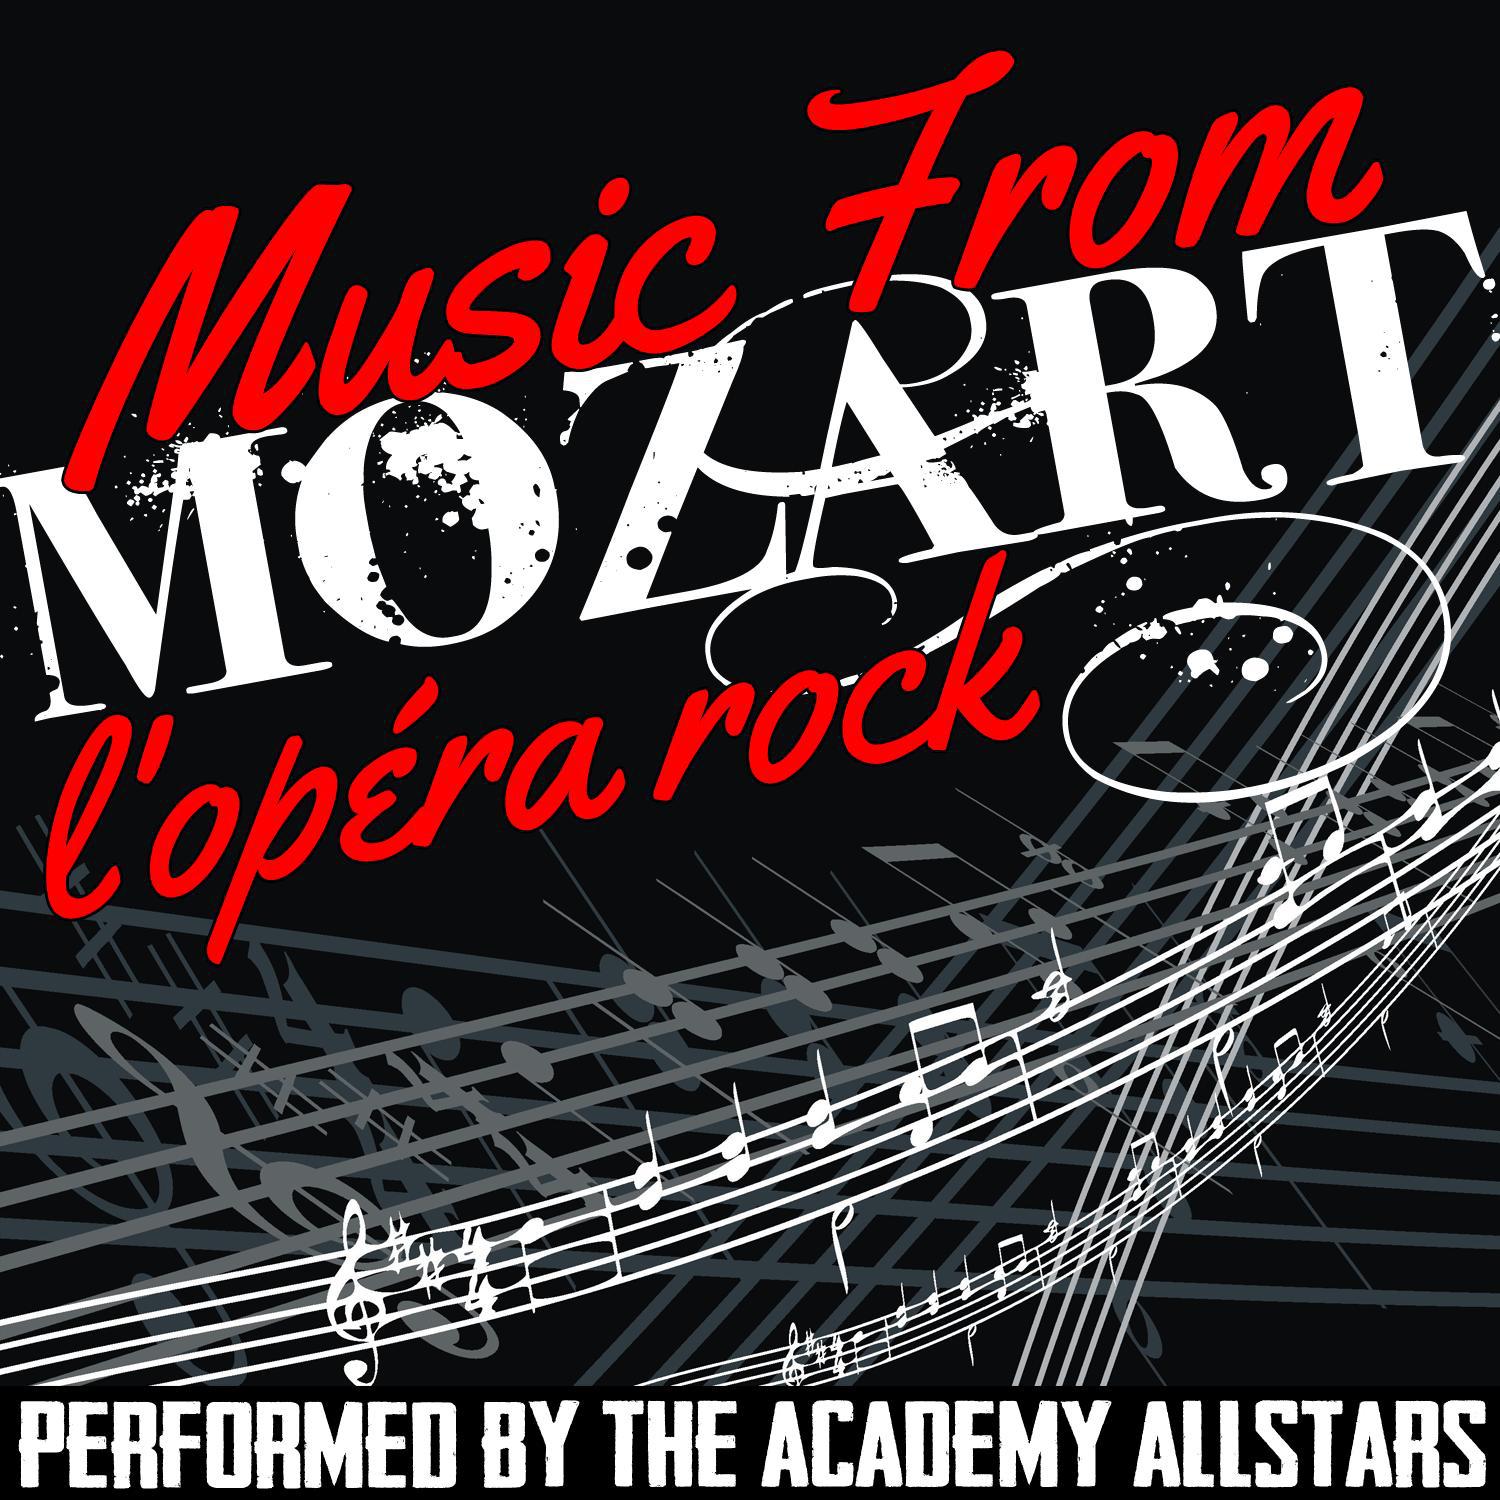 Music From: Mozart, L' ope ra Rock